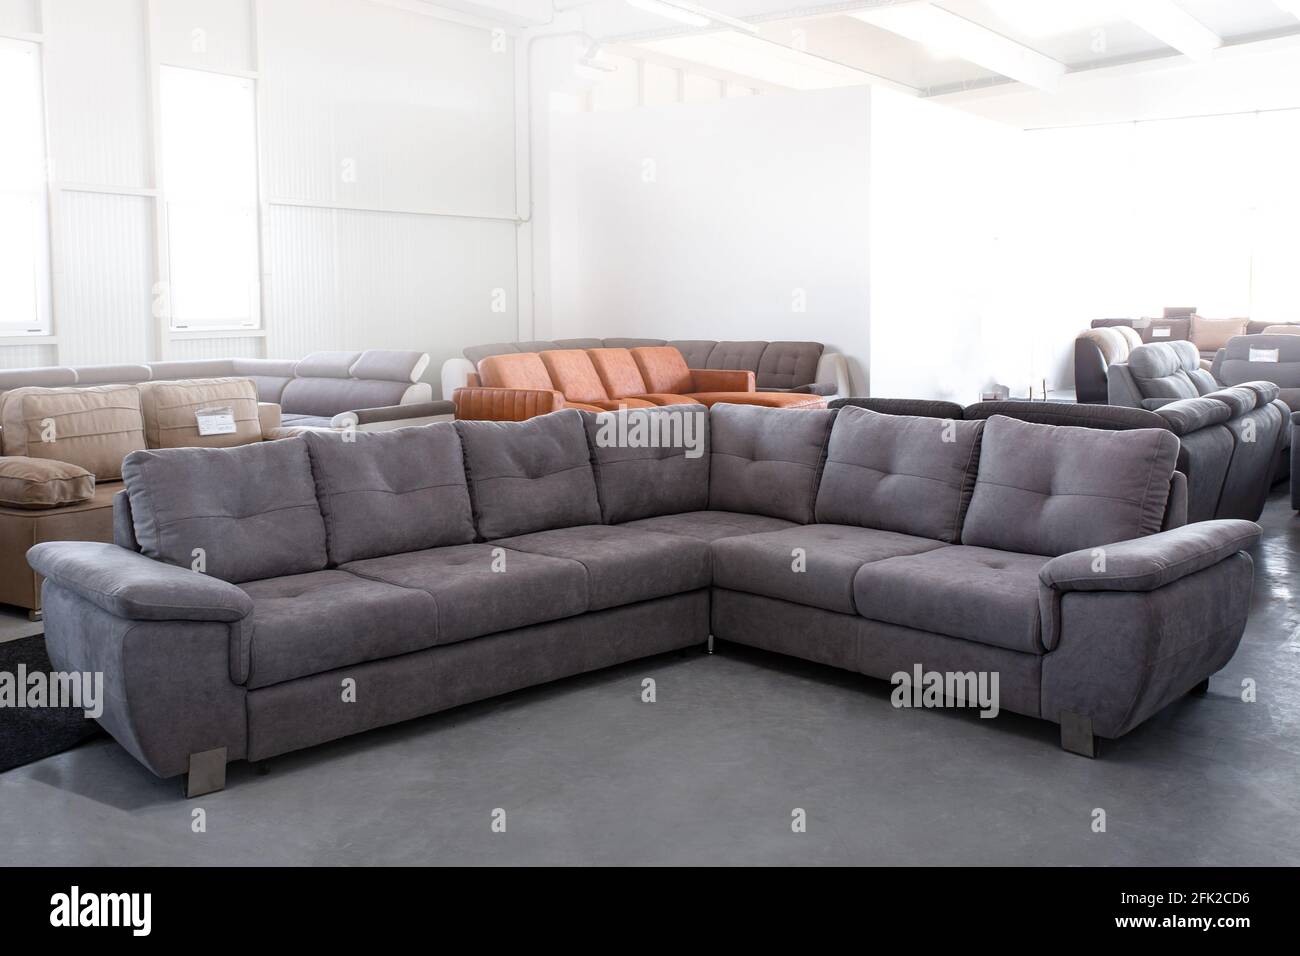 Modern design living room interior with corner sofa in a gray ...